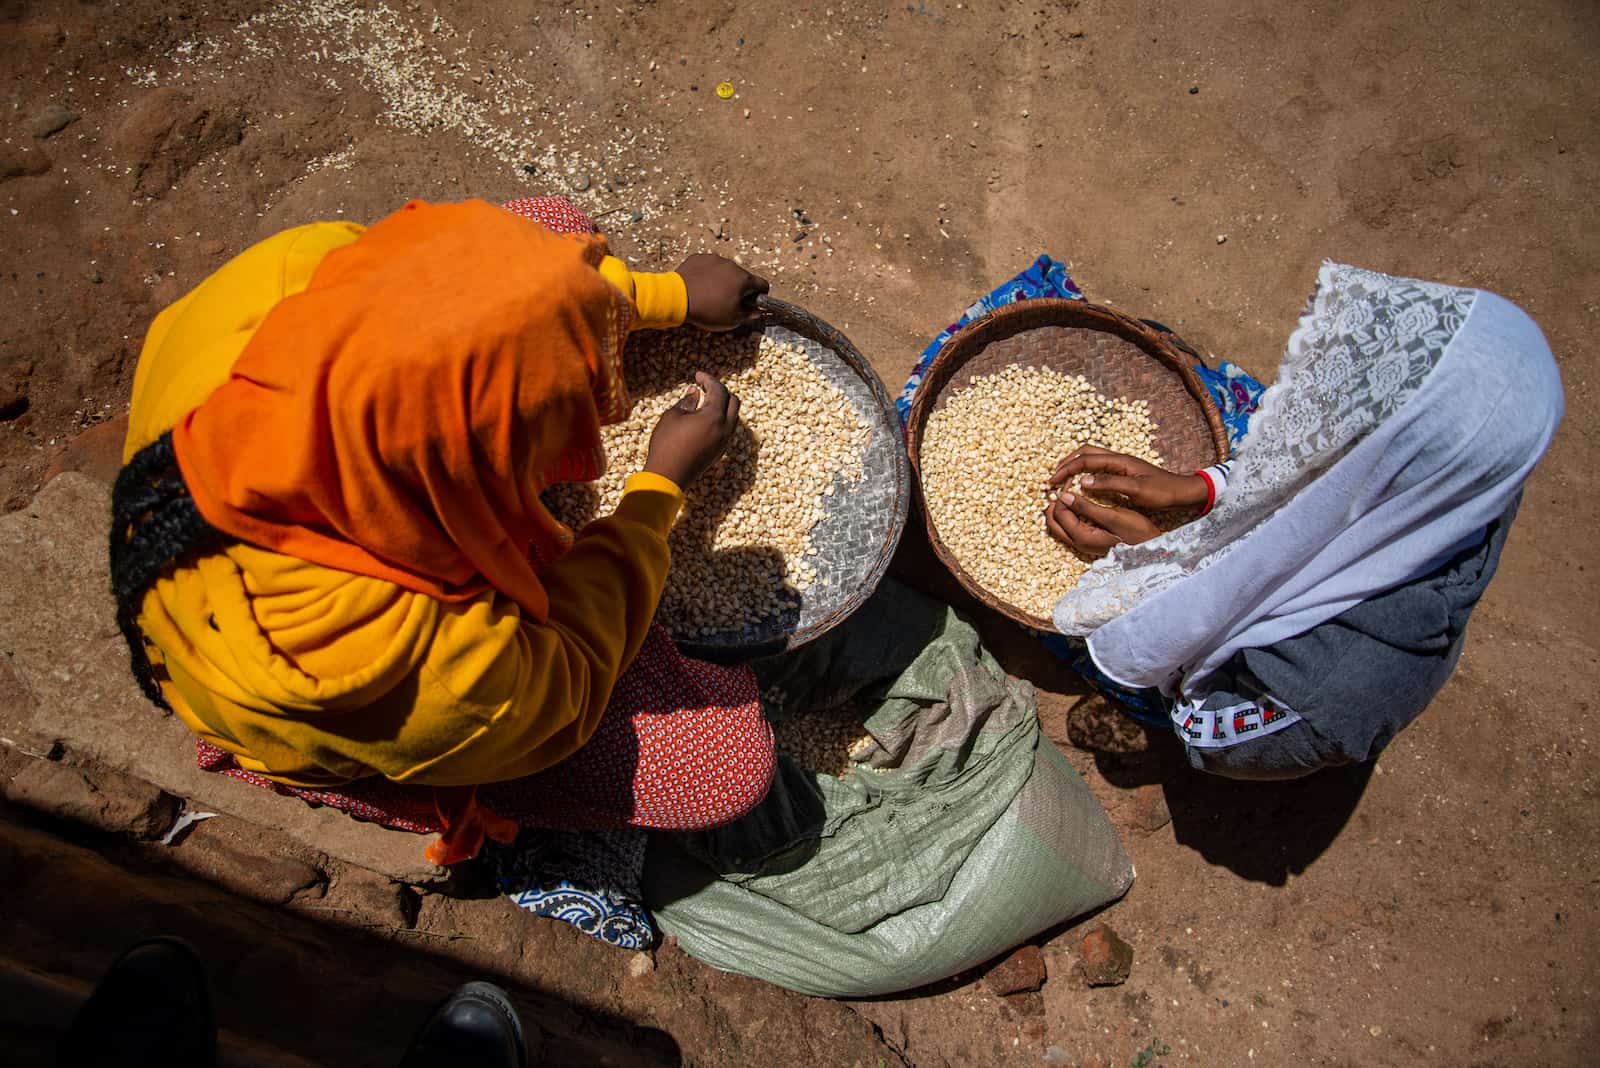 A photo of two girls from above, both sitting on the ground sorting grains.